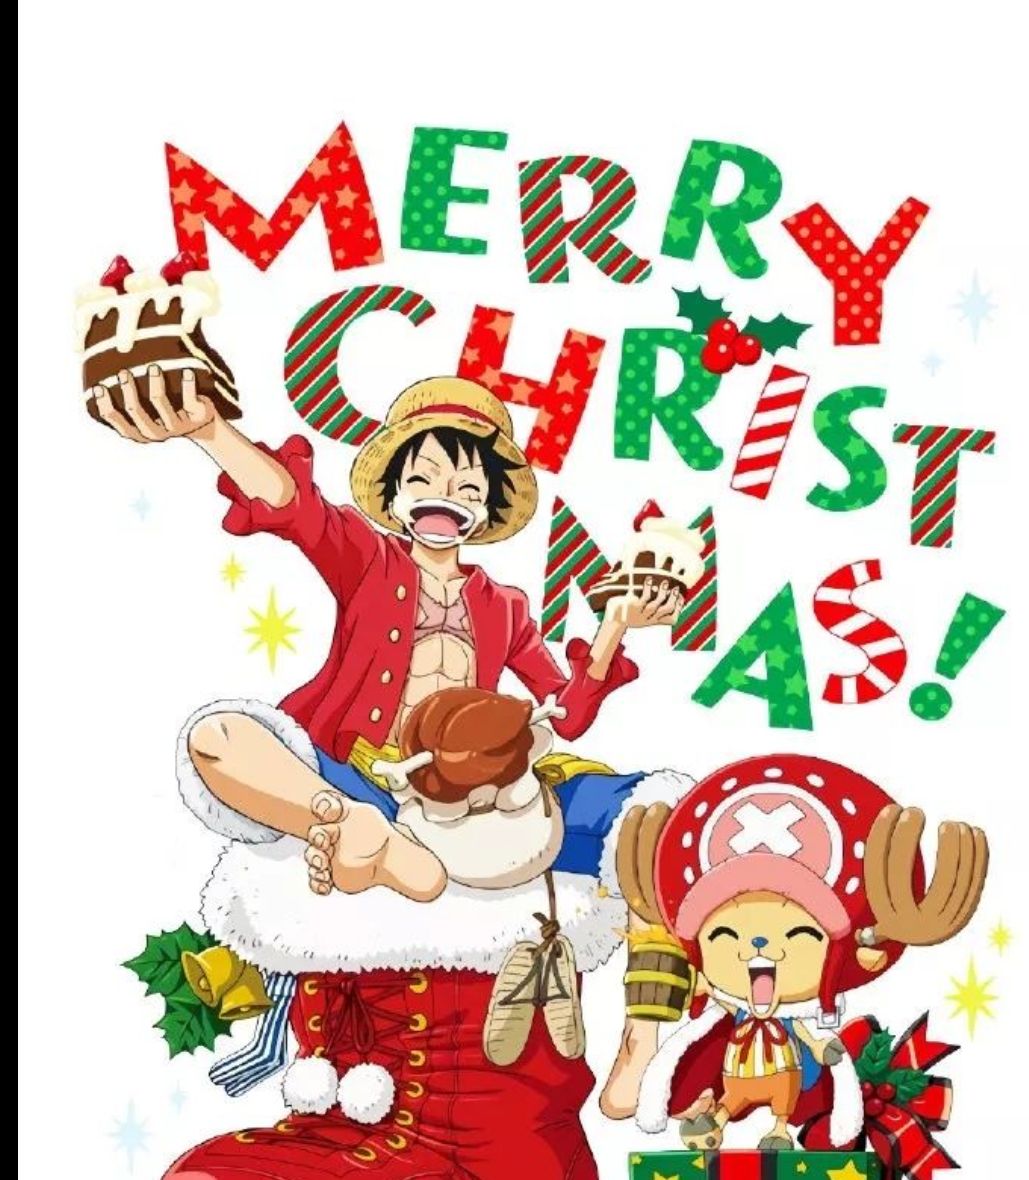 One Piece Christmas Wallpapers - Wallpaper Cave